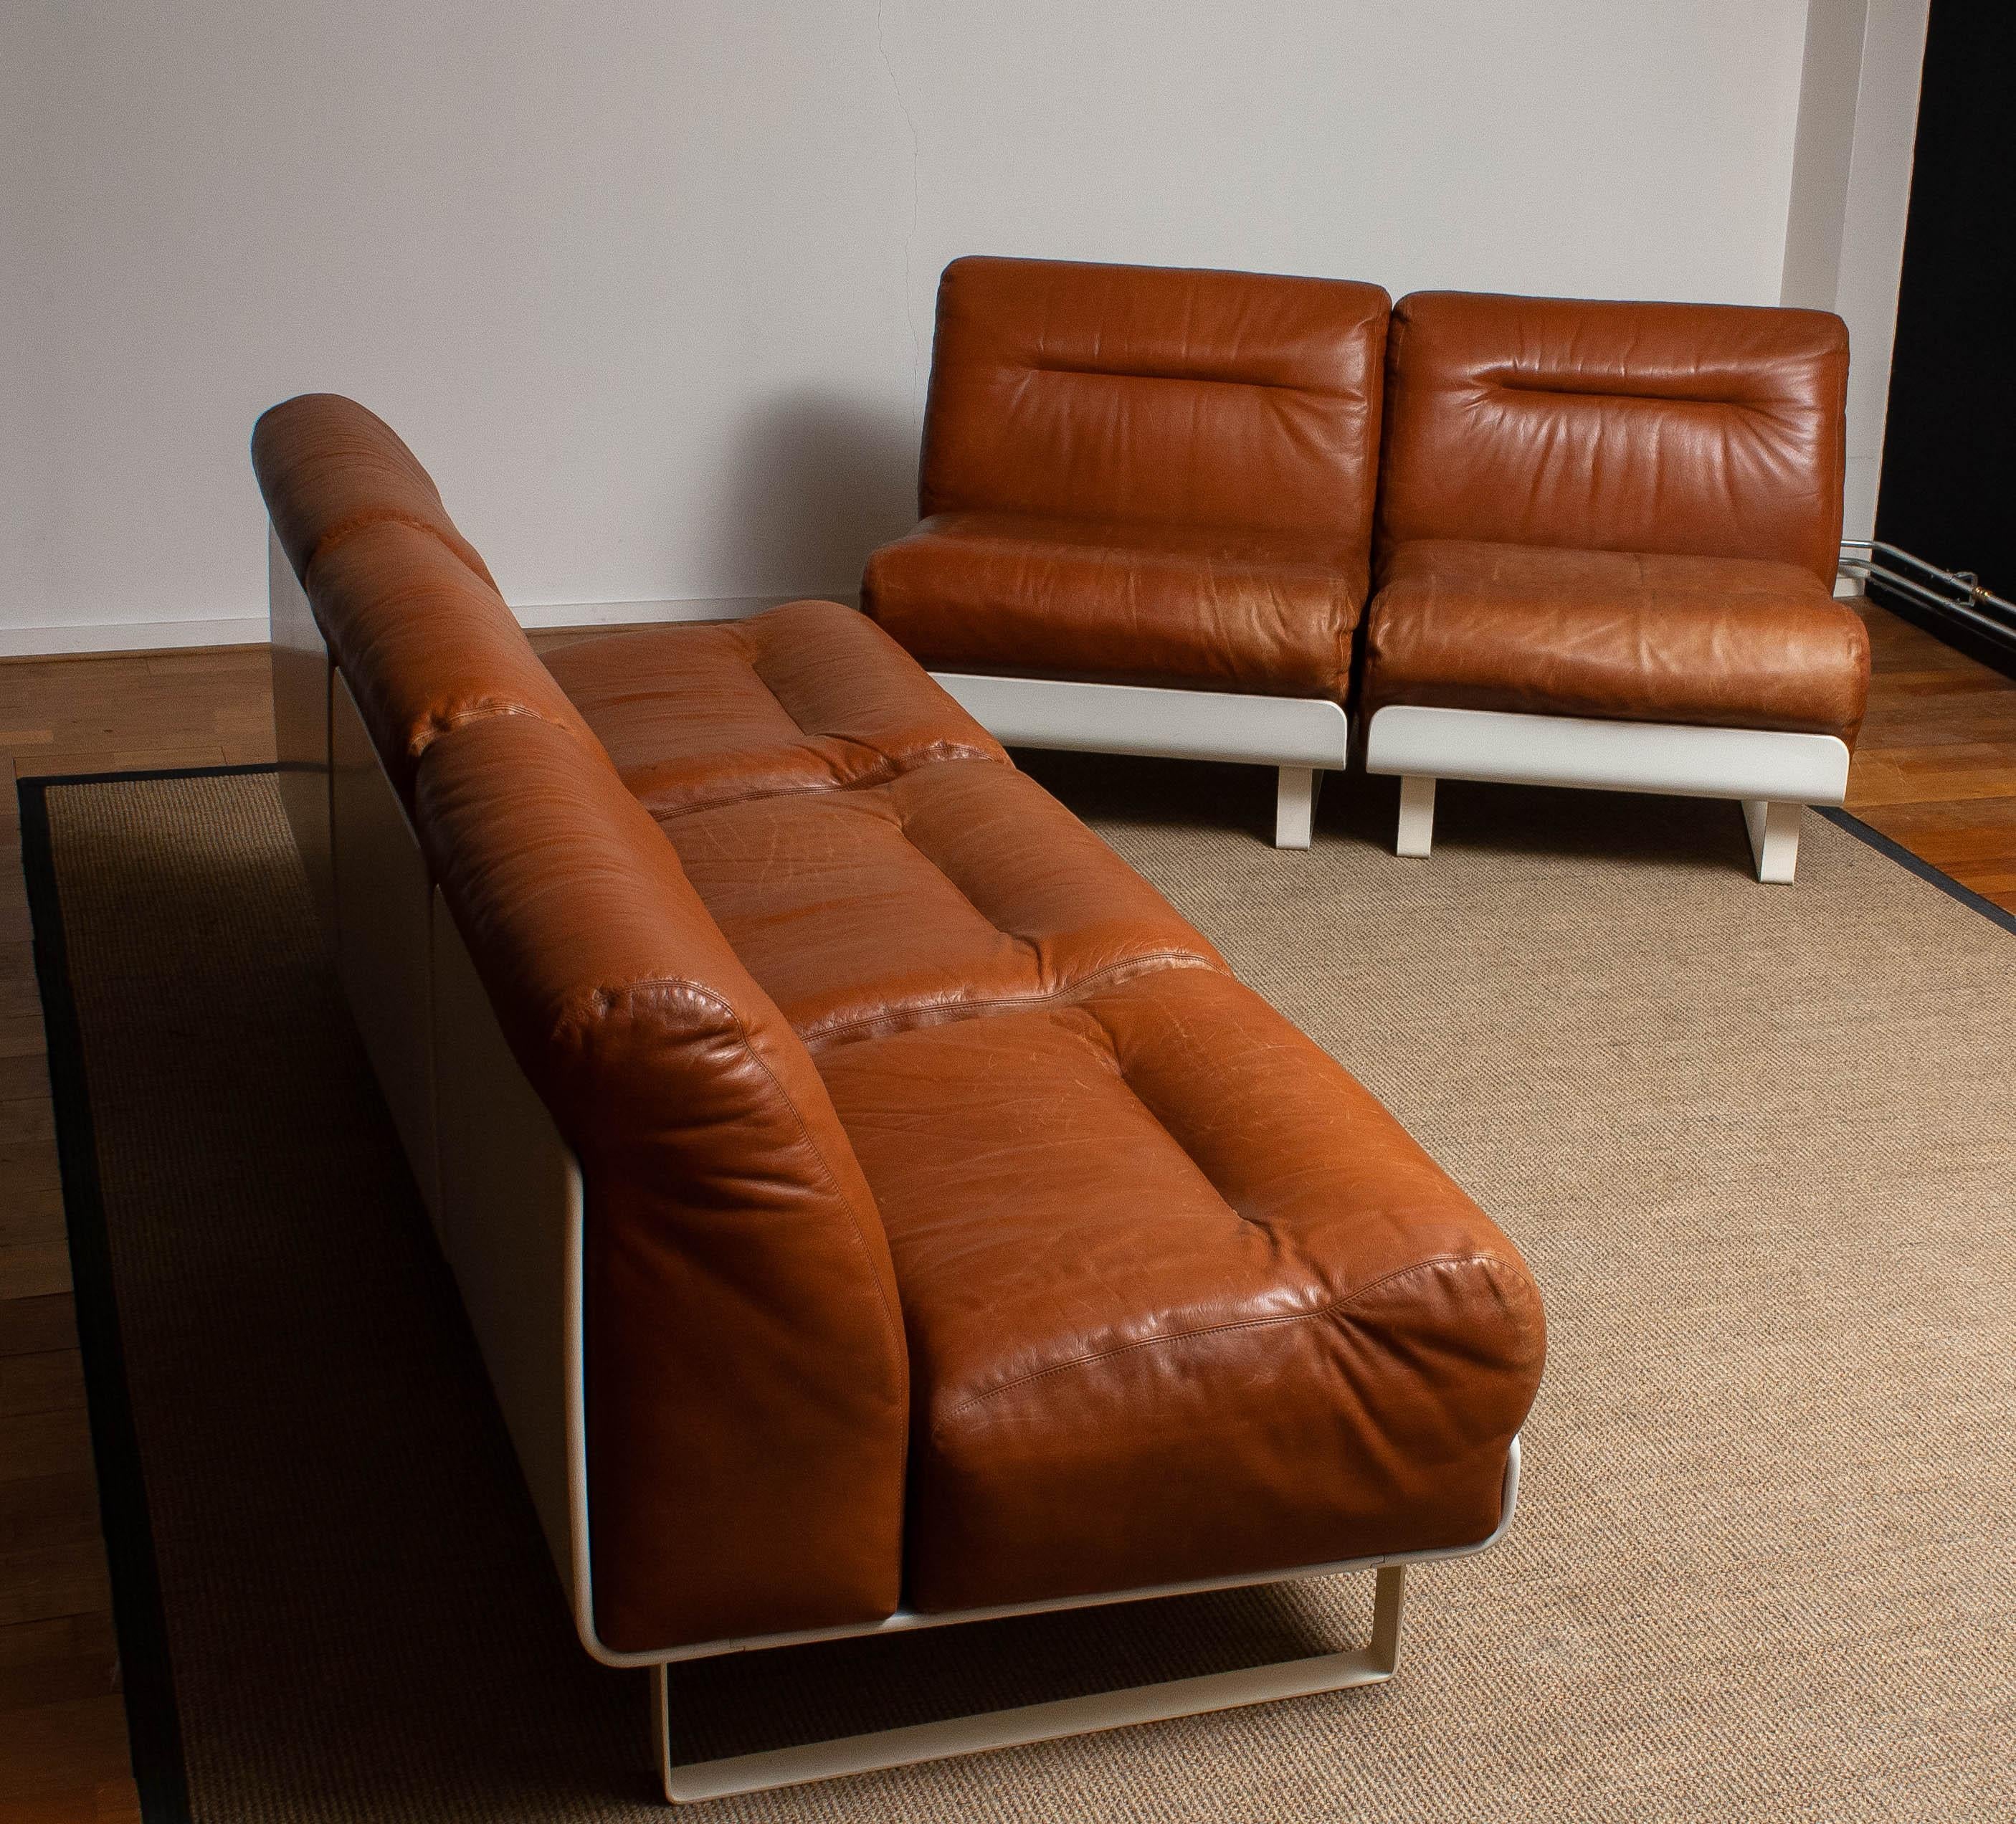 Space Age '70s Tan / Cognac Leather Sectional Sofa / Club Chairs by Luici Colani for COR